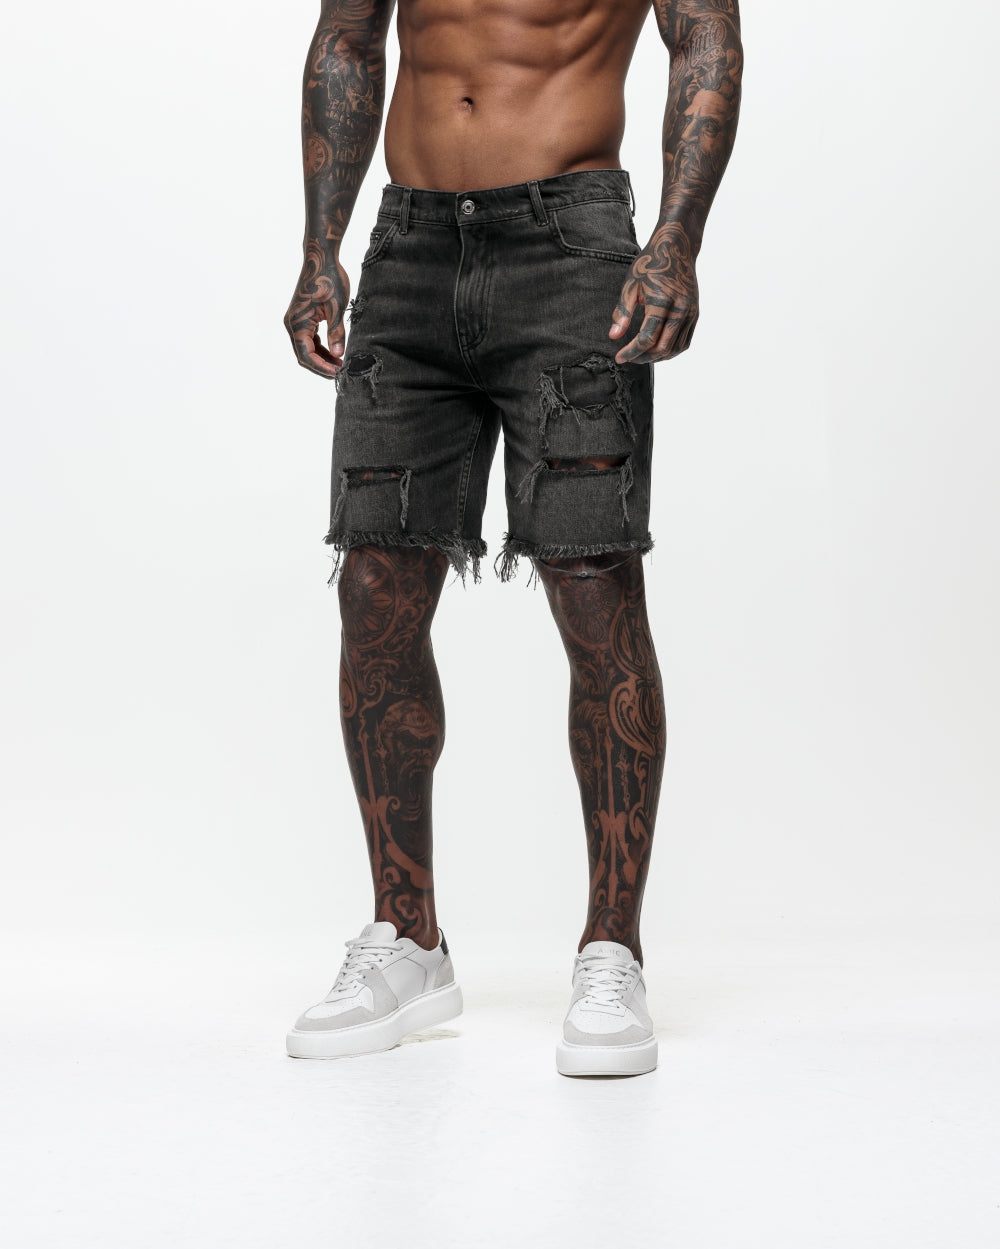 Relaxed Fit Ripped Denim Shorts - Black